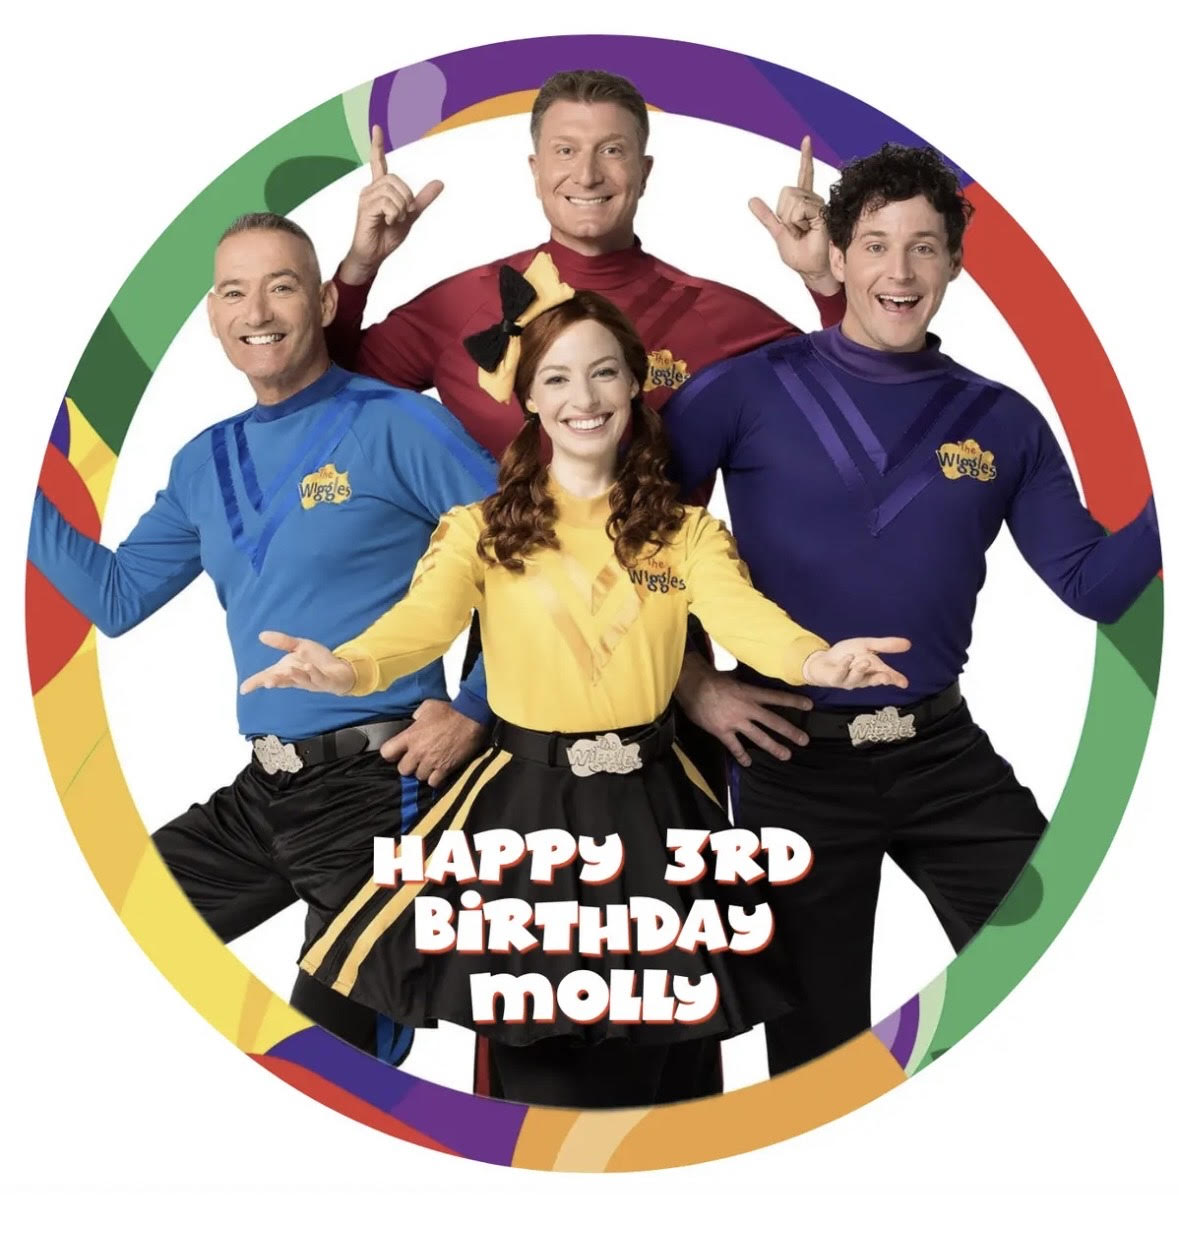 The Wiggles #2 Round Cake Edible Icing Image Topper 19cm